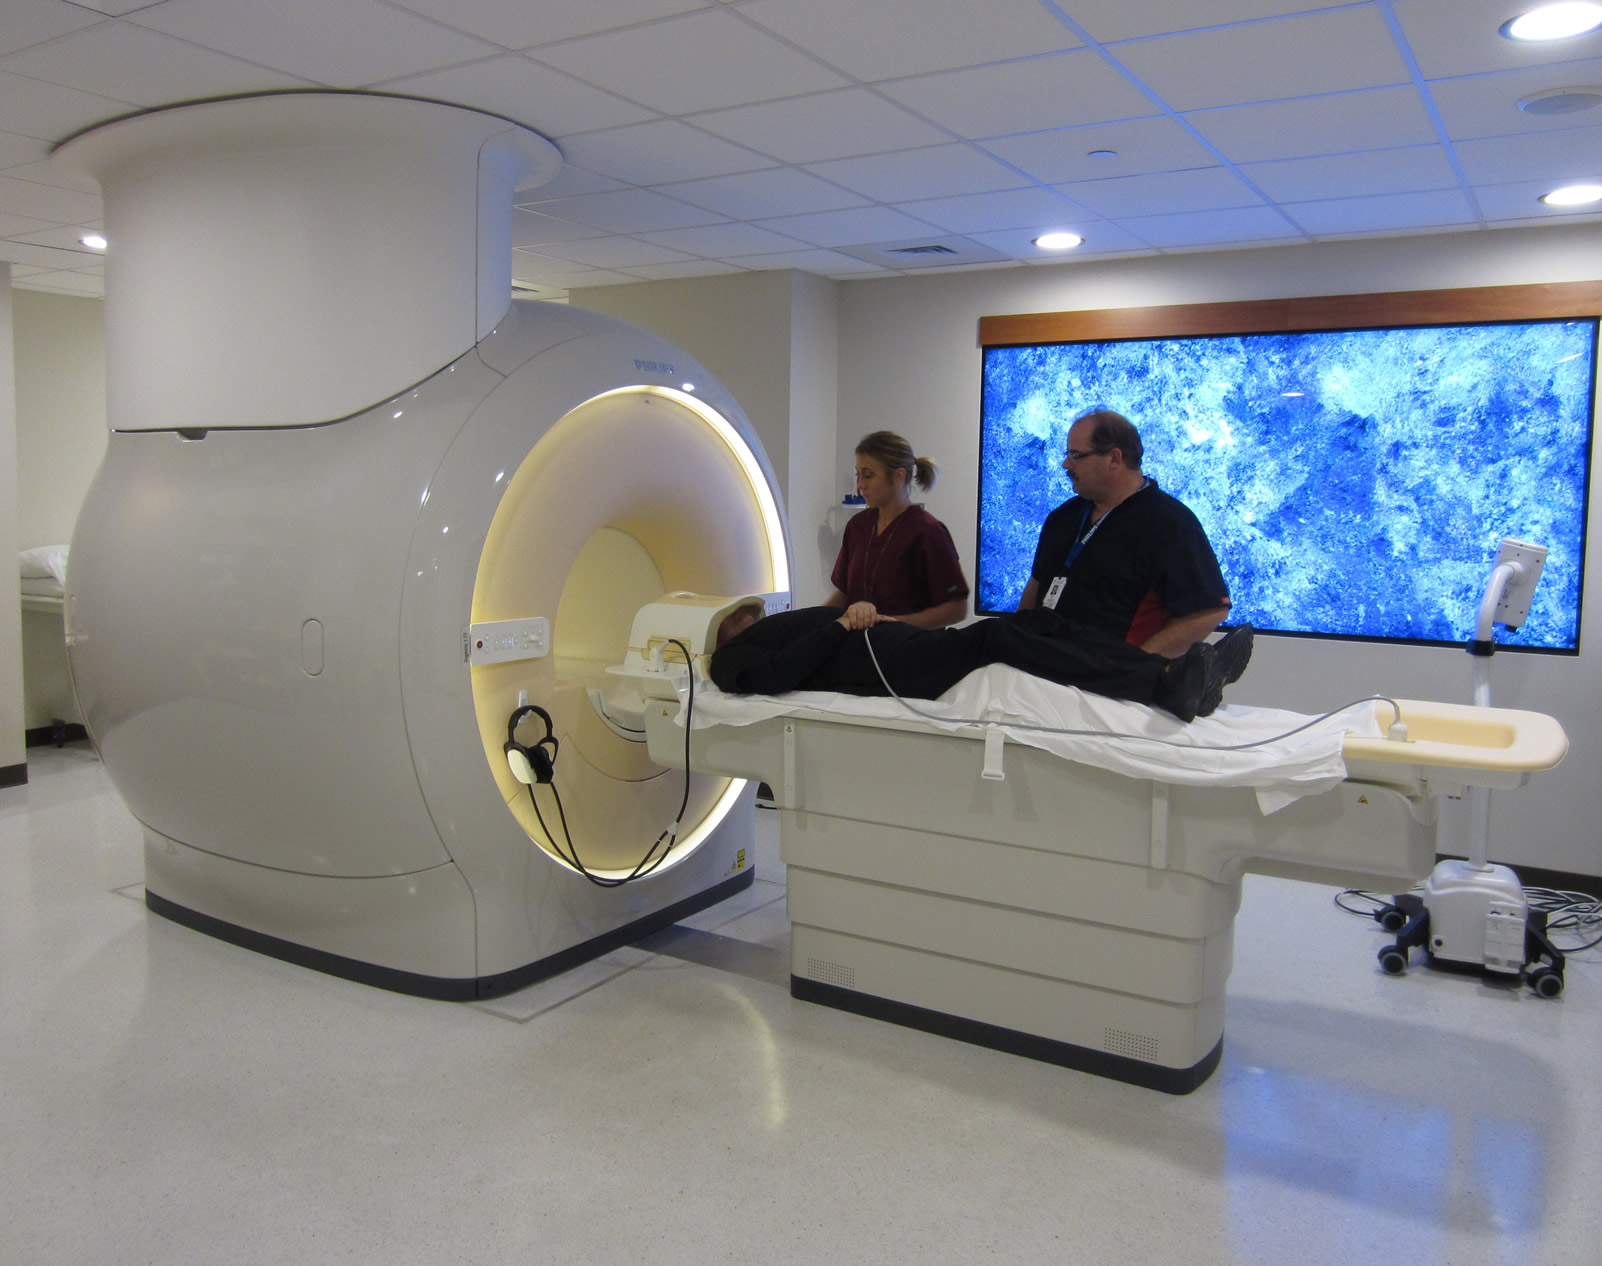 Whittier techs assisting patient with MRI machine